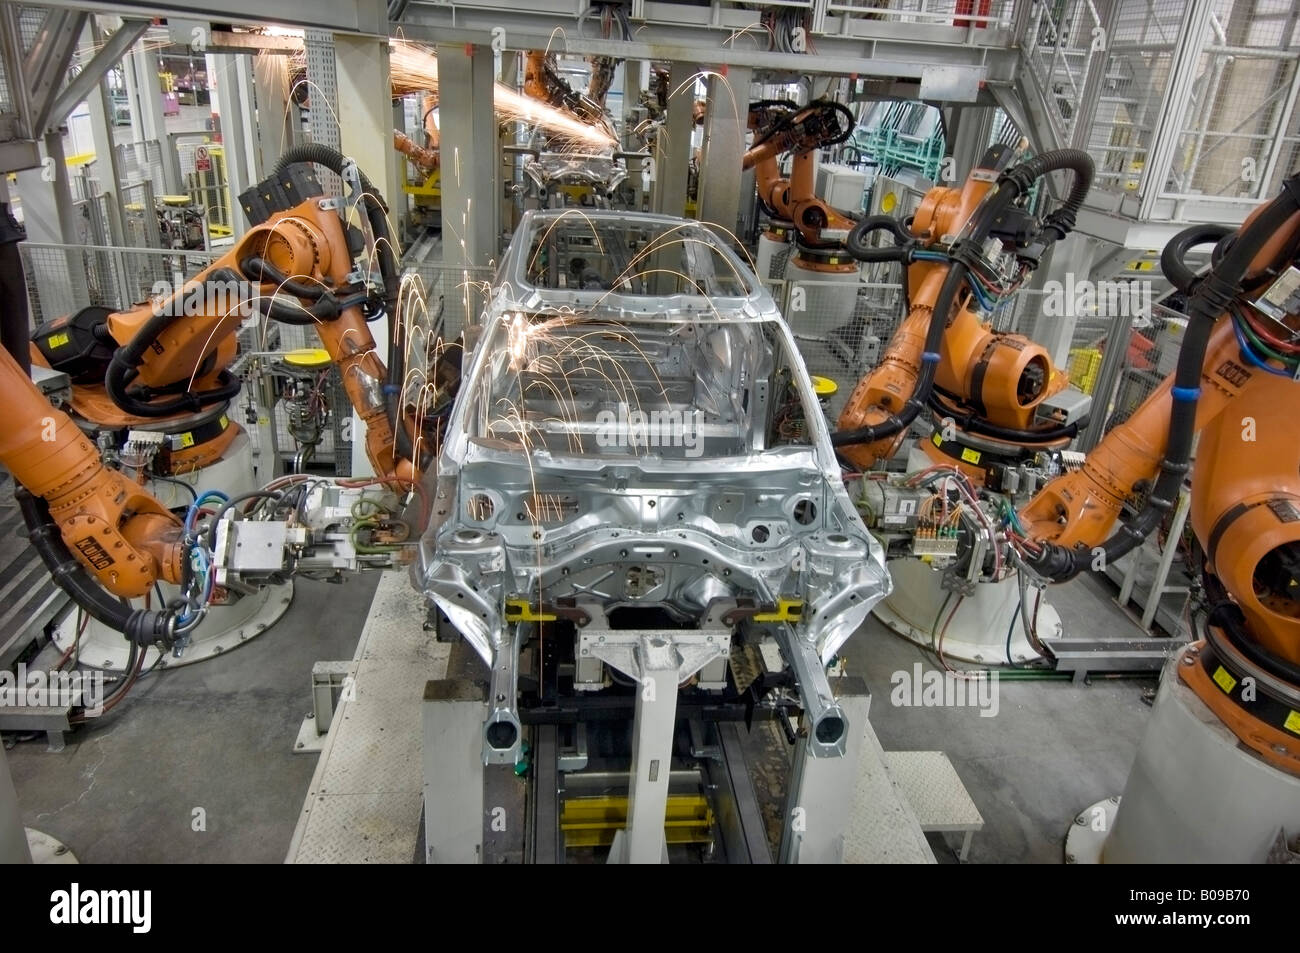 Mini Clubman production line at the BMW factory at Cowley, Oxford UK Stock Photo